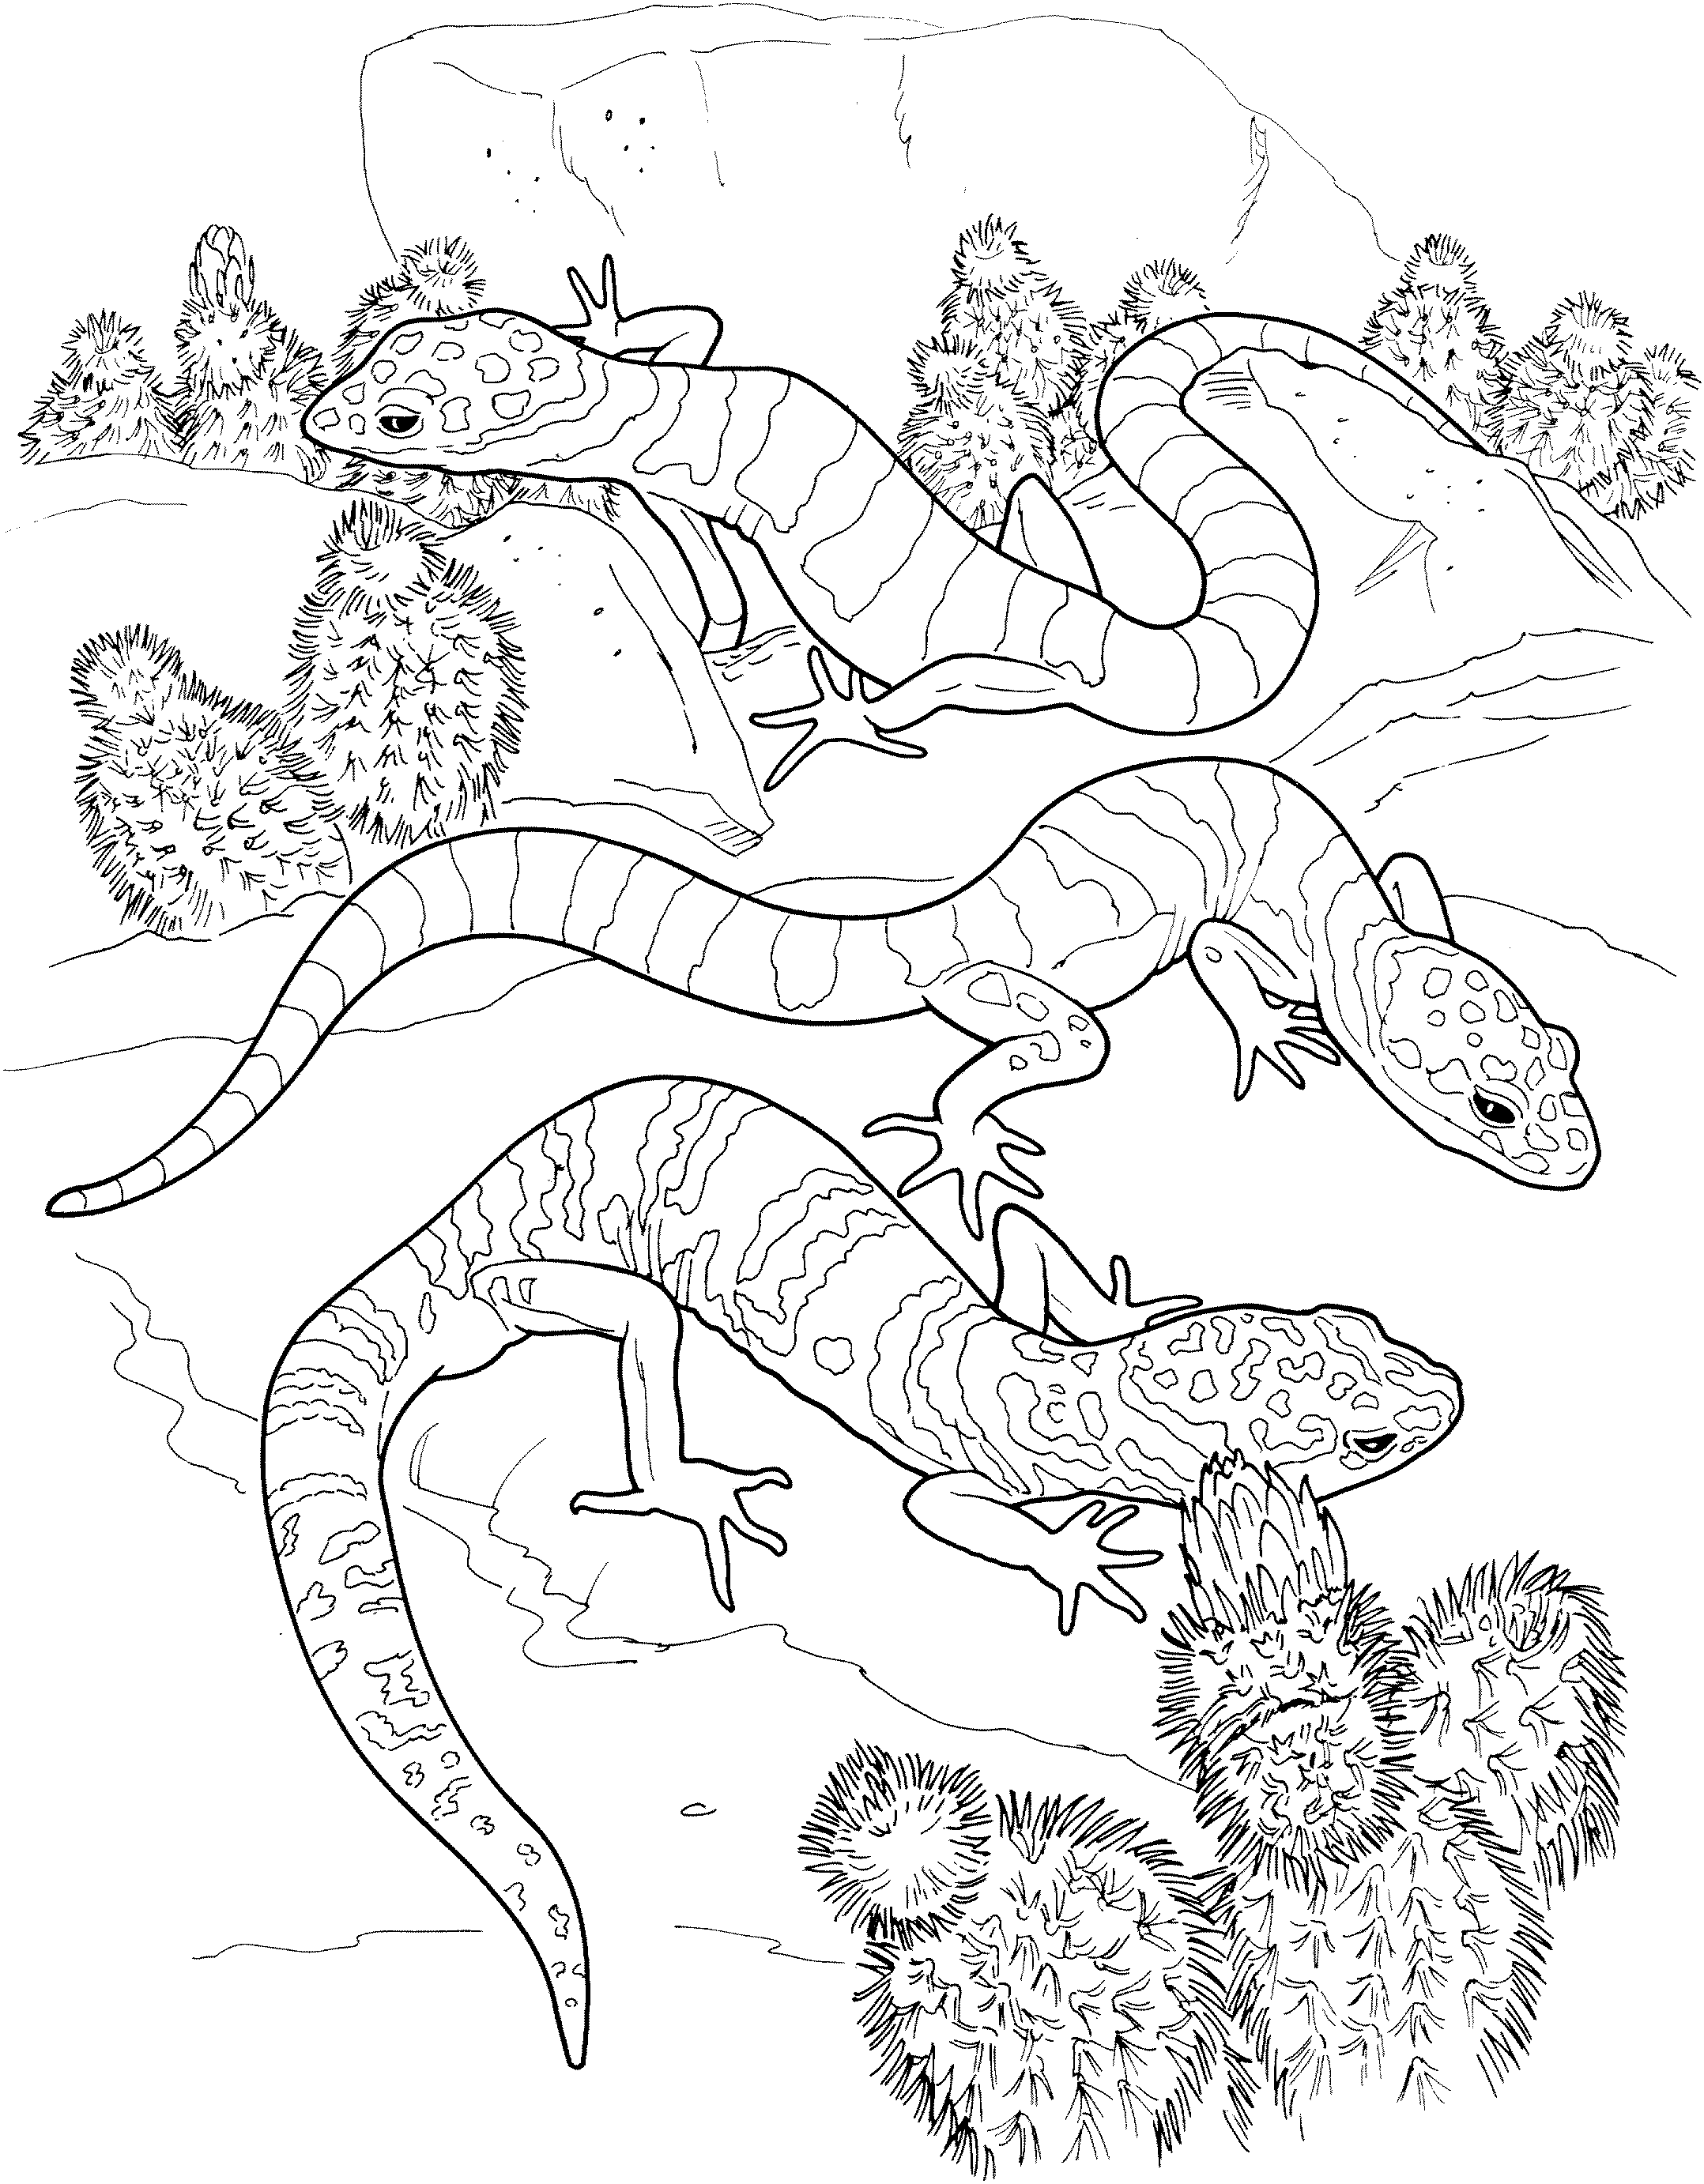 Coloring Lizards Printable Coloring Pages